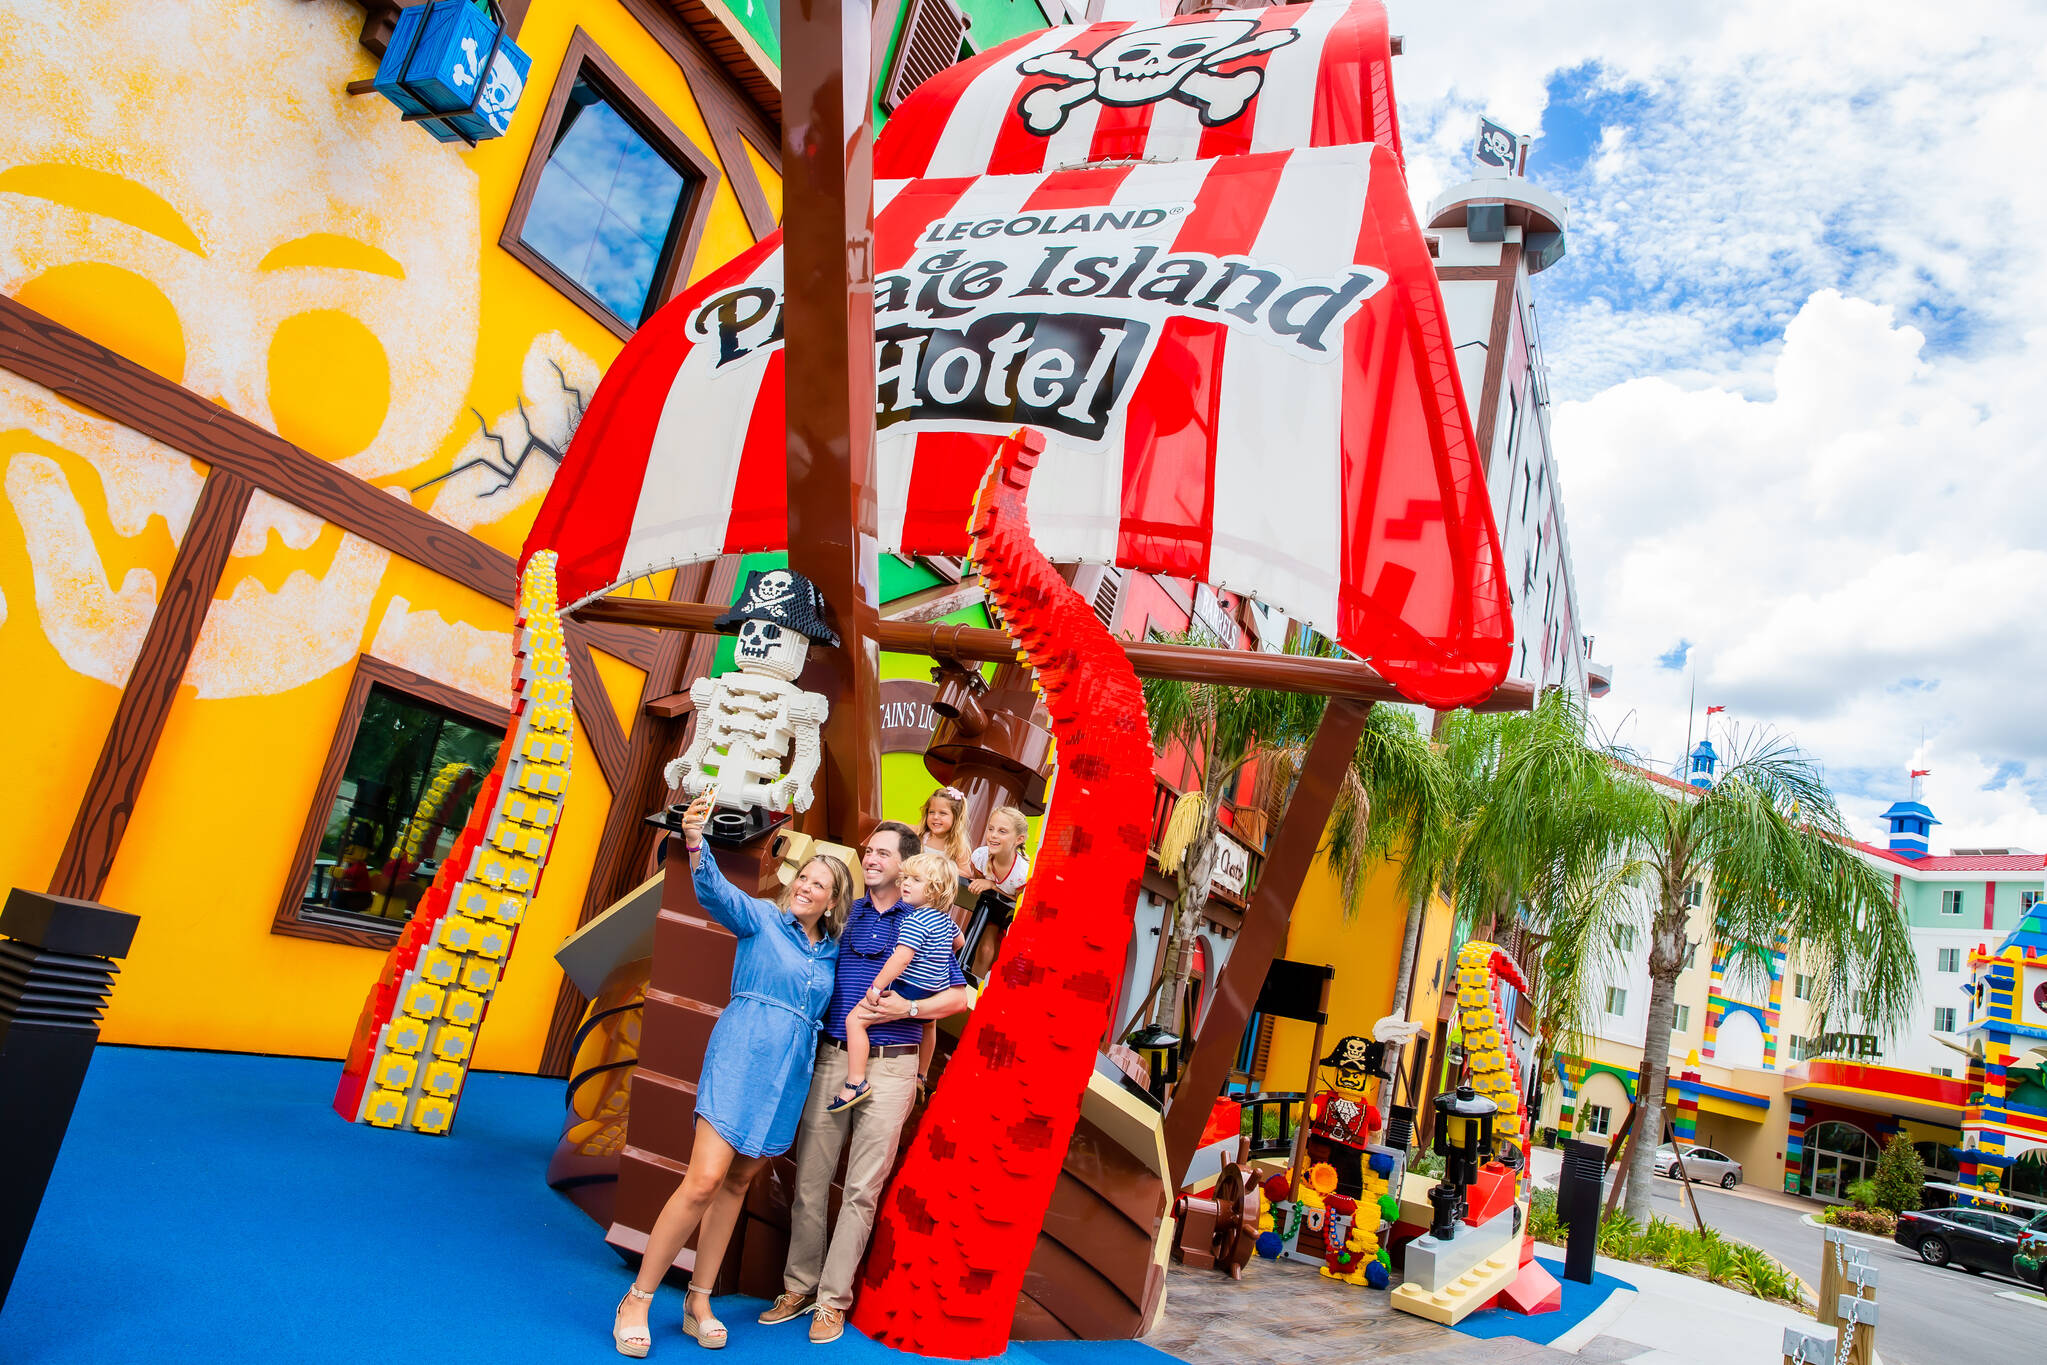 Take a selfie outside of the Pirate Island Hotel 